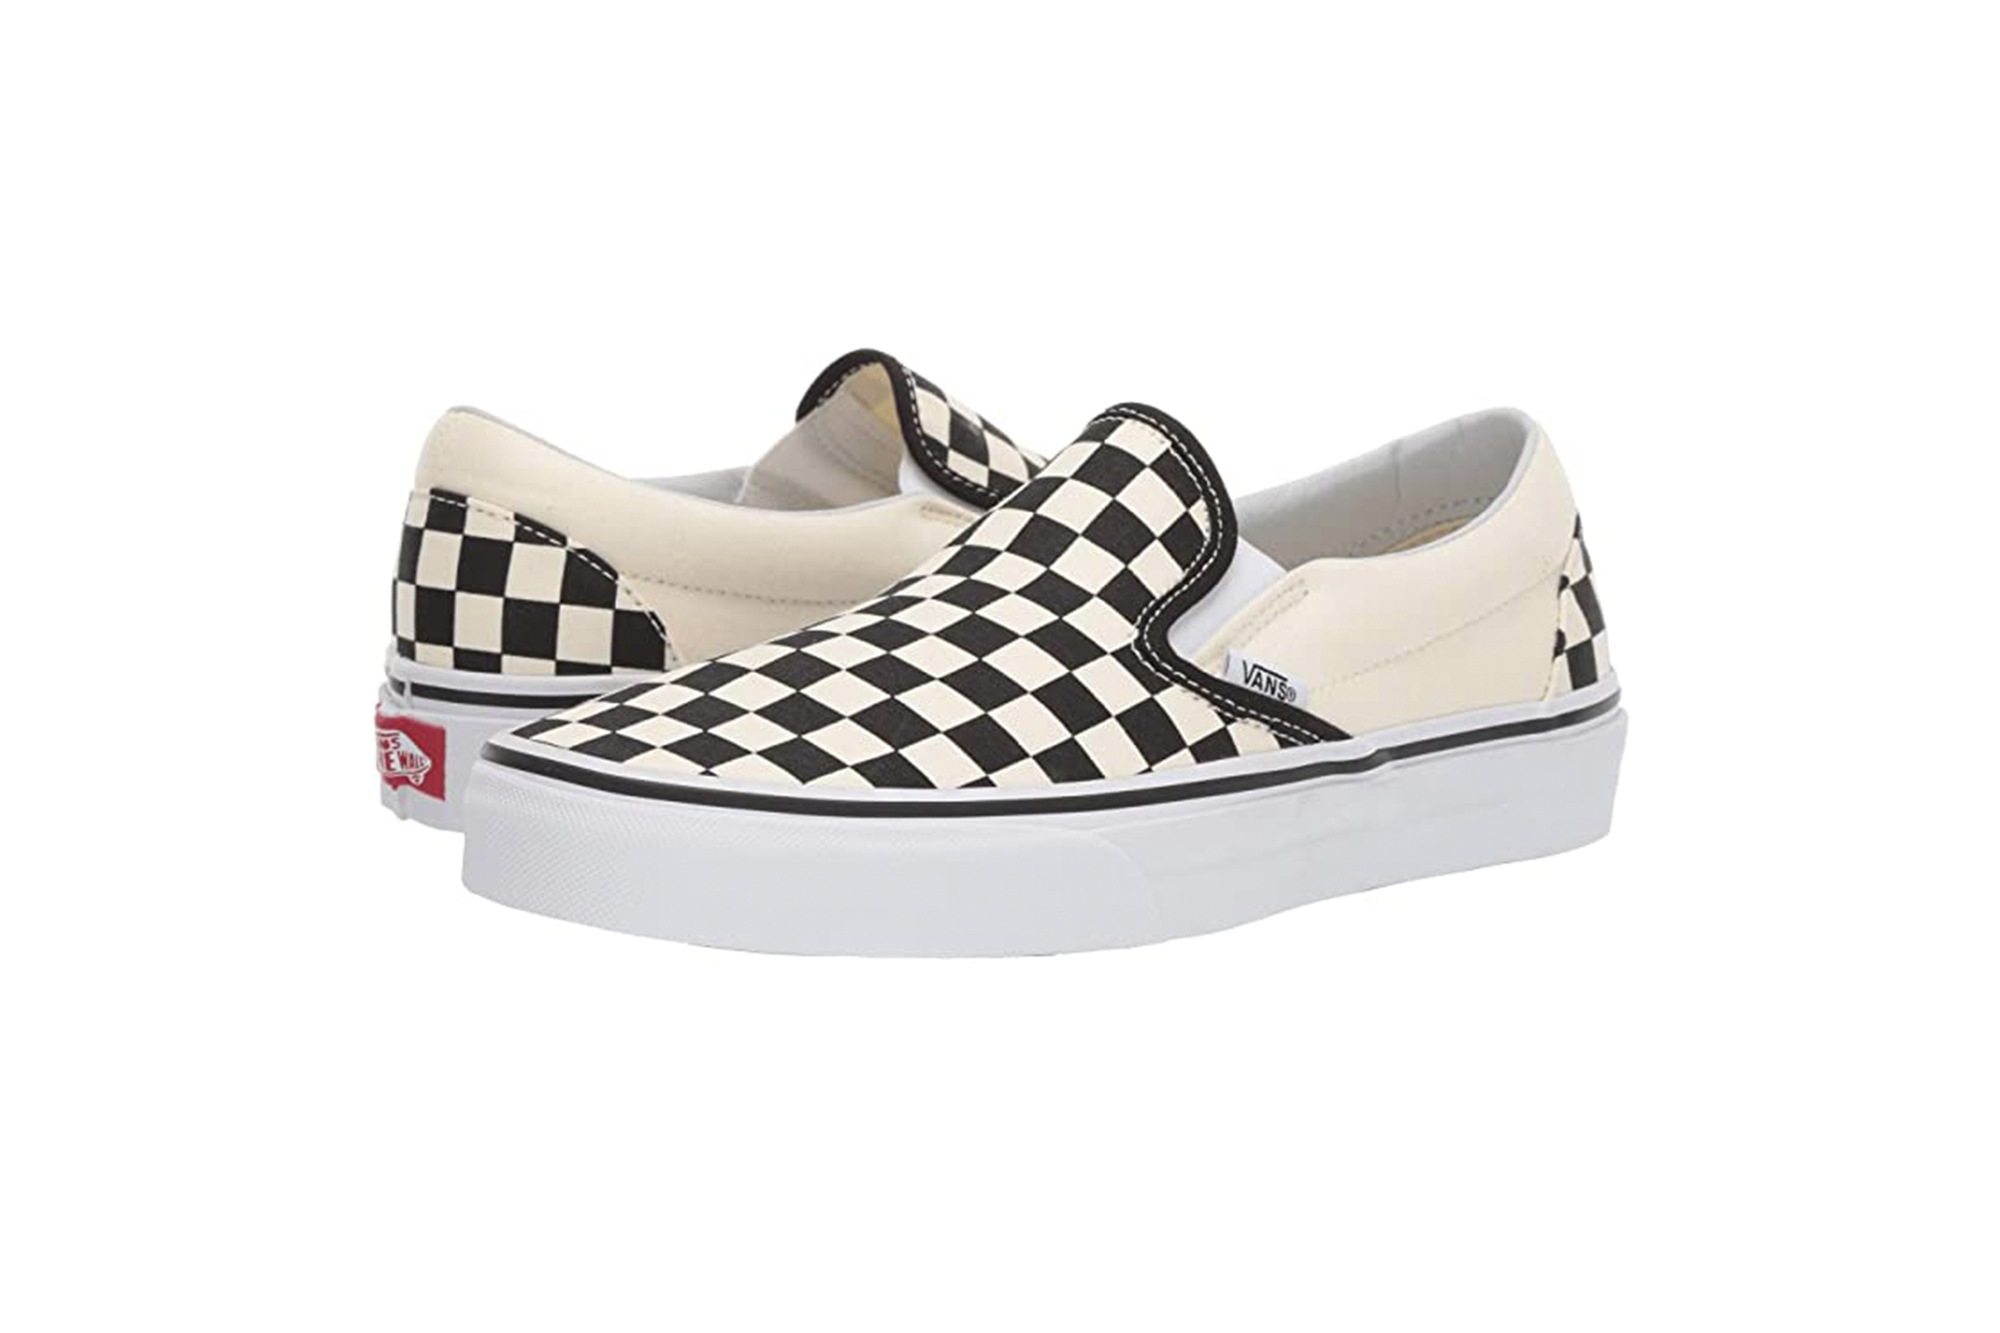 Vans Classic Slip-Ons Are the Official 